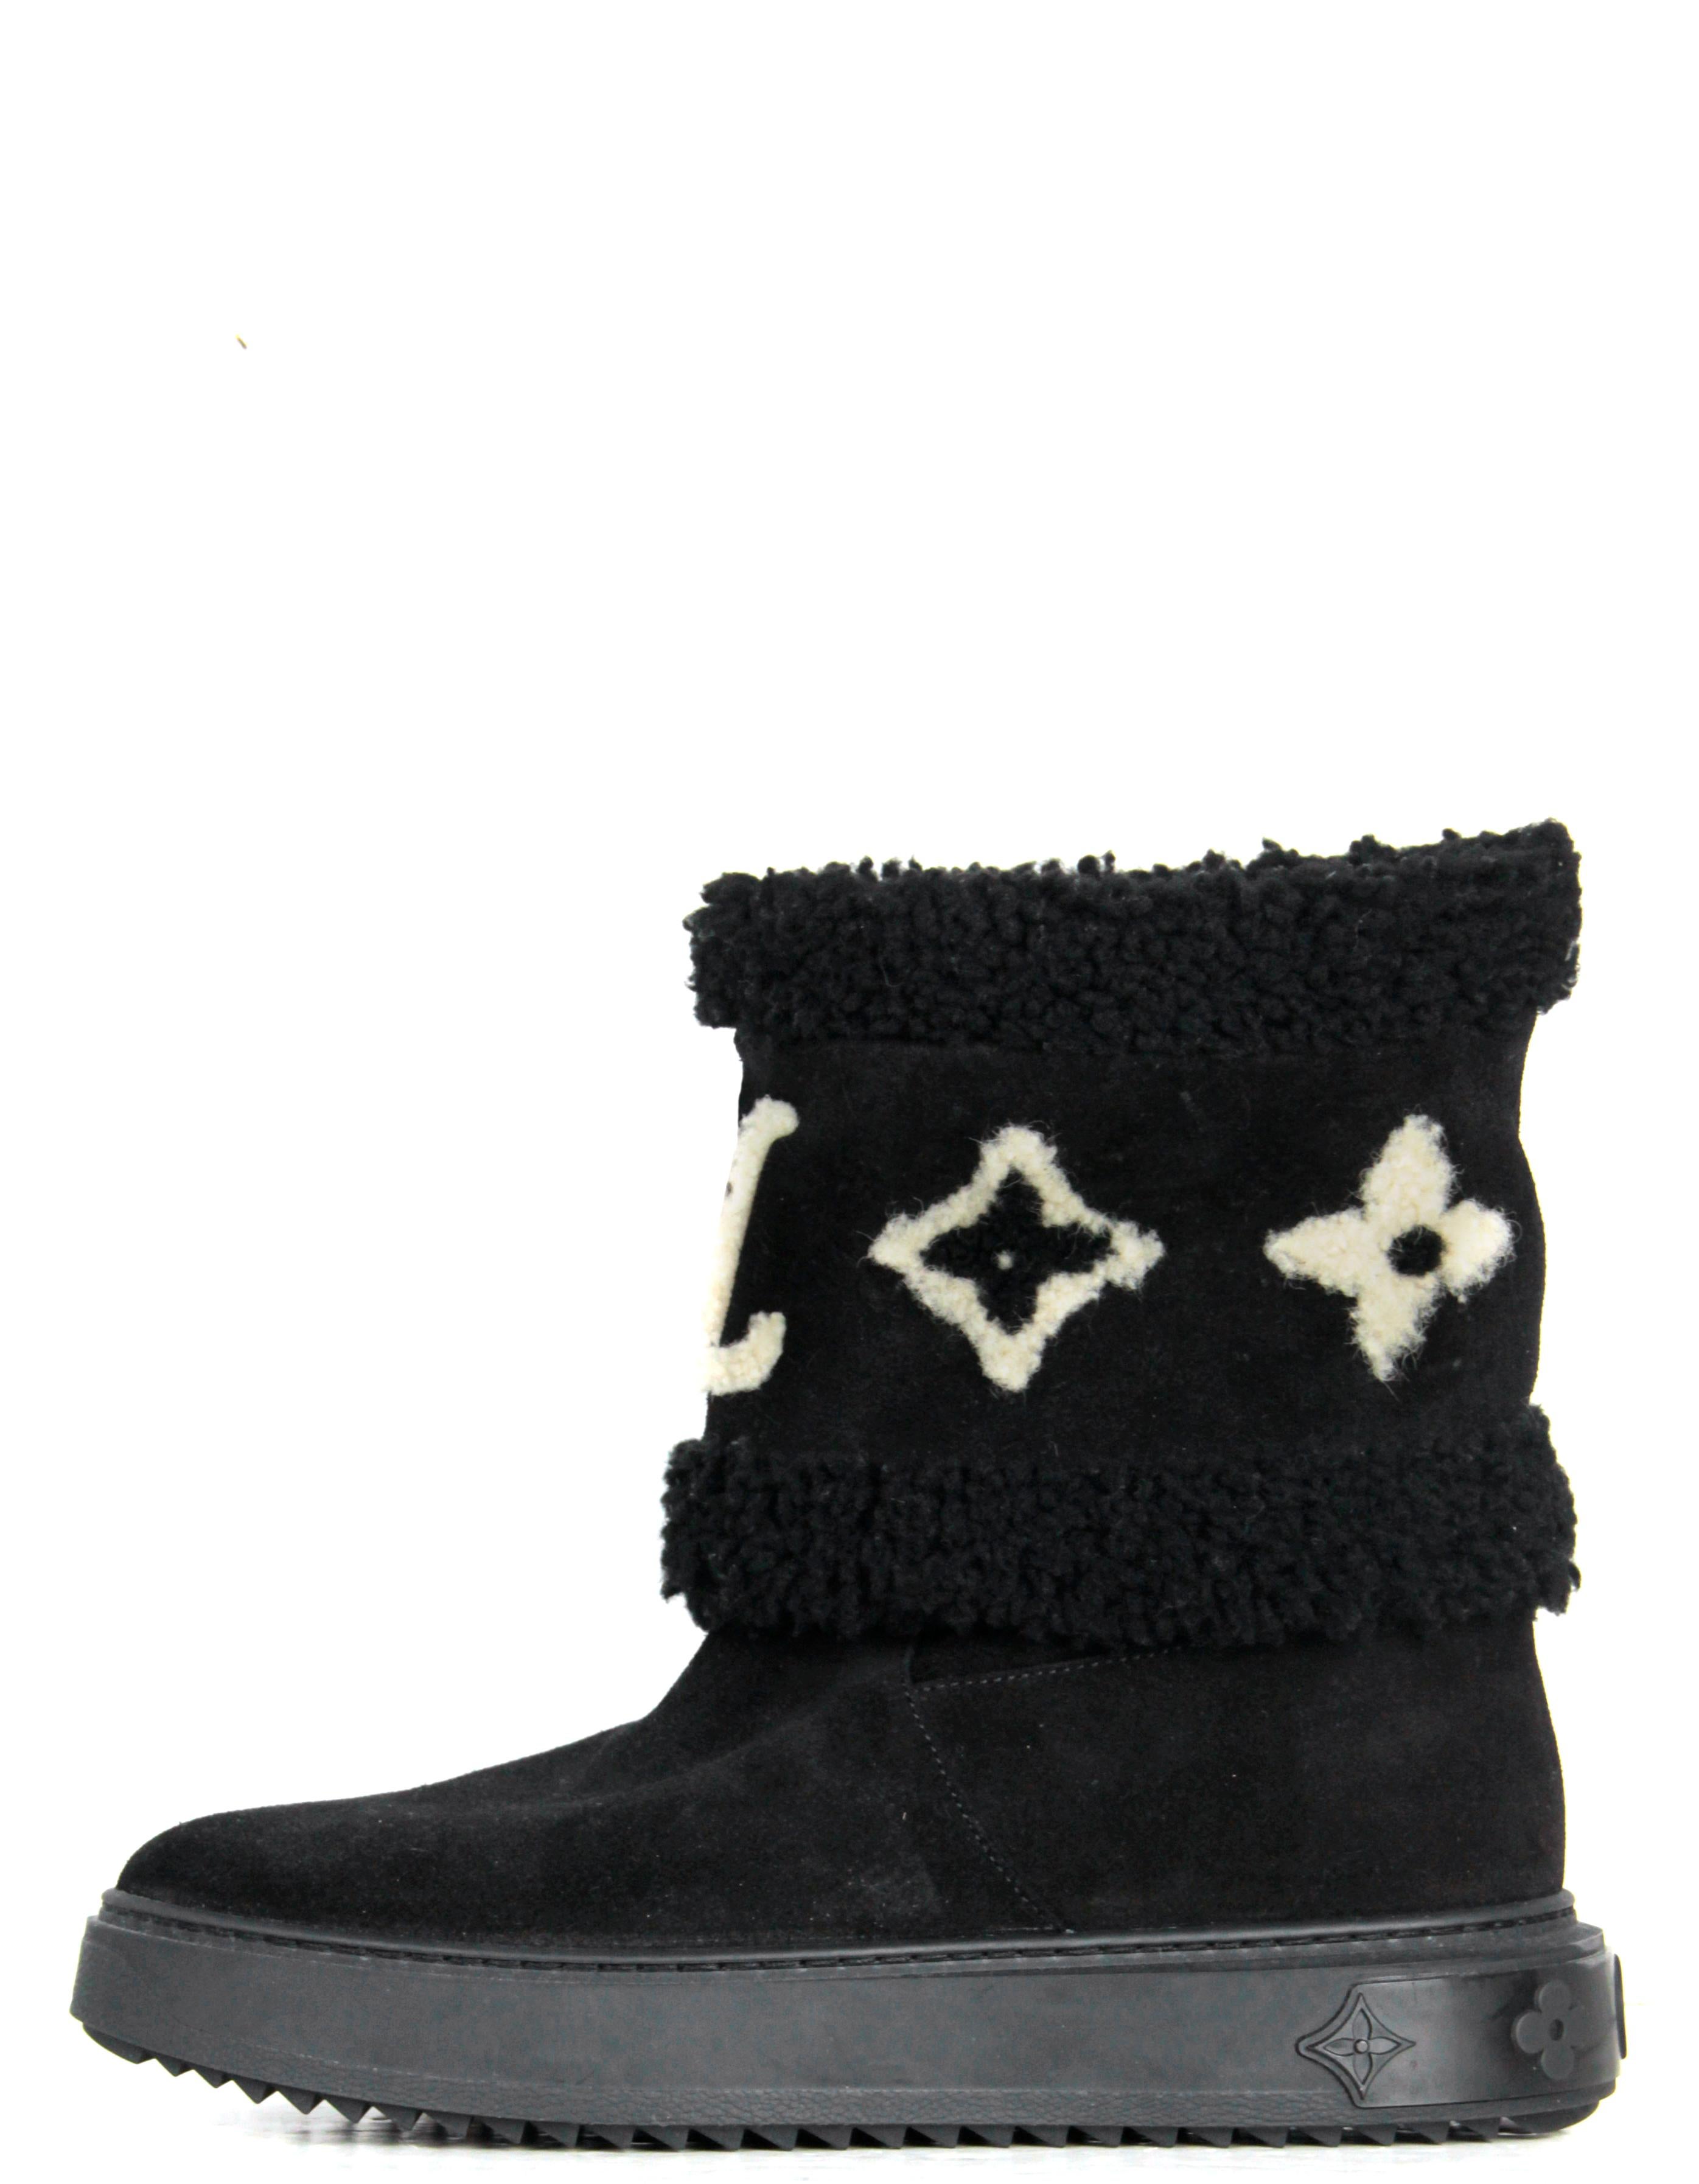 Women's Louis Vuitton NEW Suede/Shearling Snowdrop Flat Ankle Boots sz 39